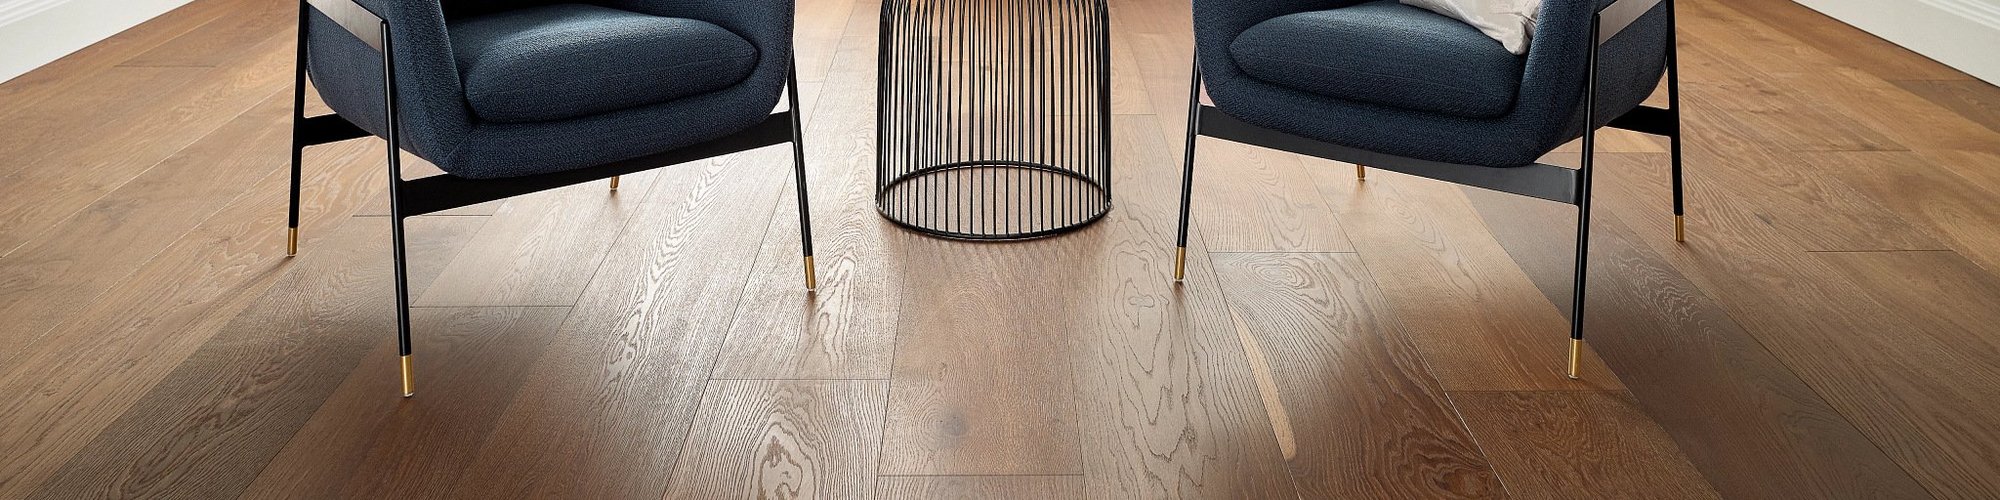 two arm chairs on wood floors - Dishman Flooring Center